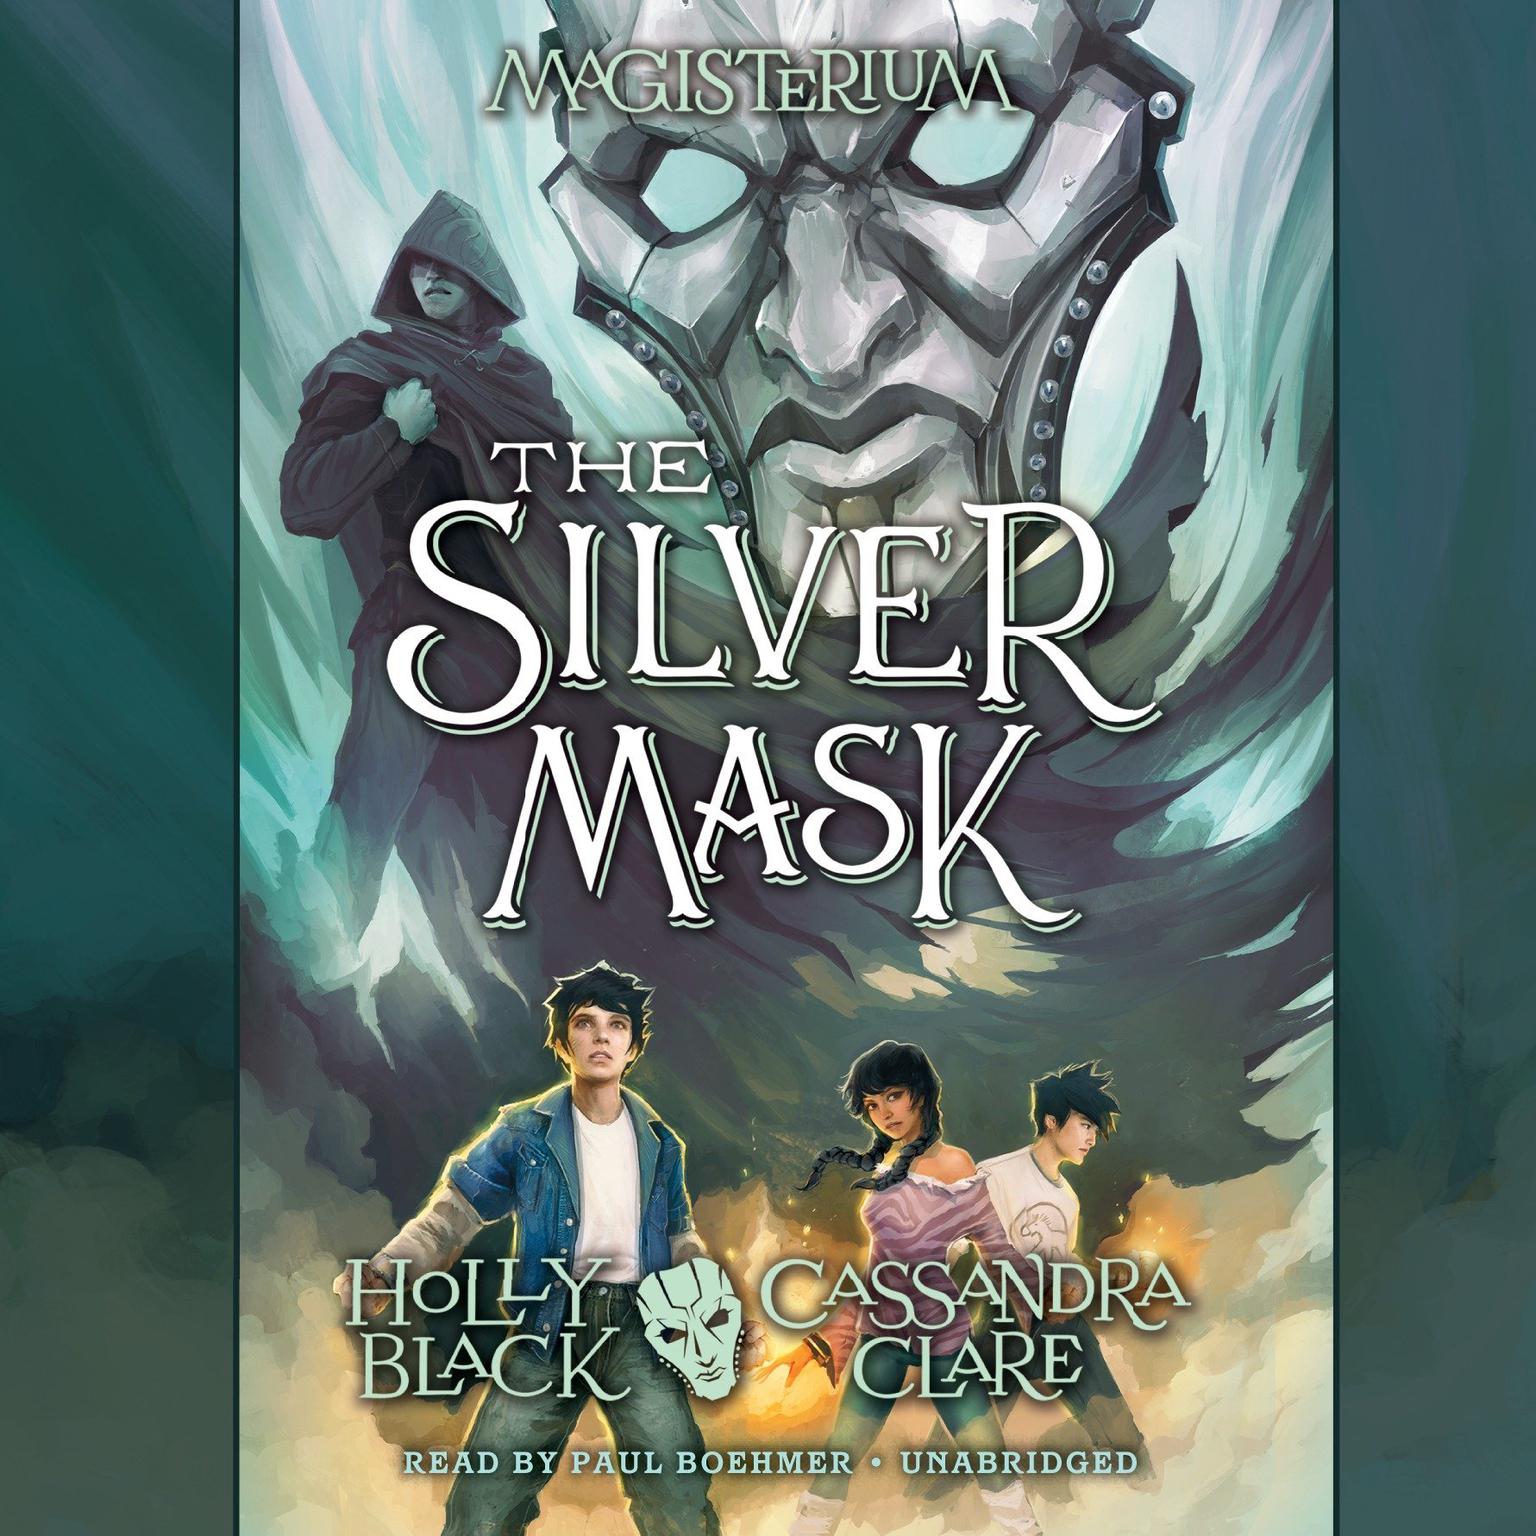 The Silver Mask: Magisterium Book 4 Audiobook, by Cassandra Clare